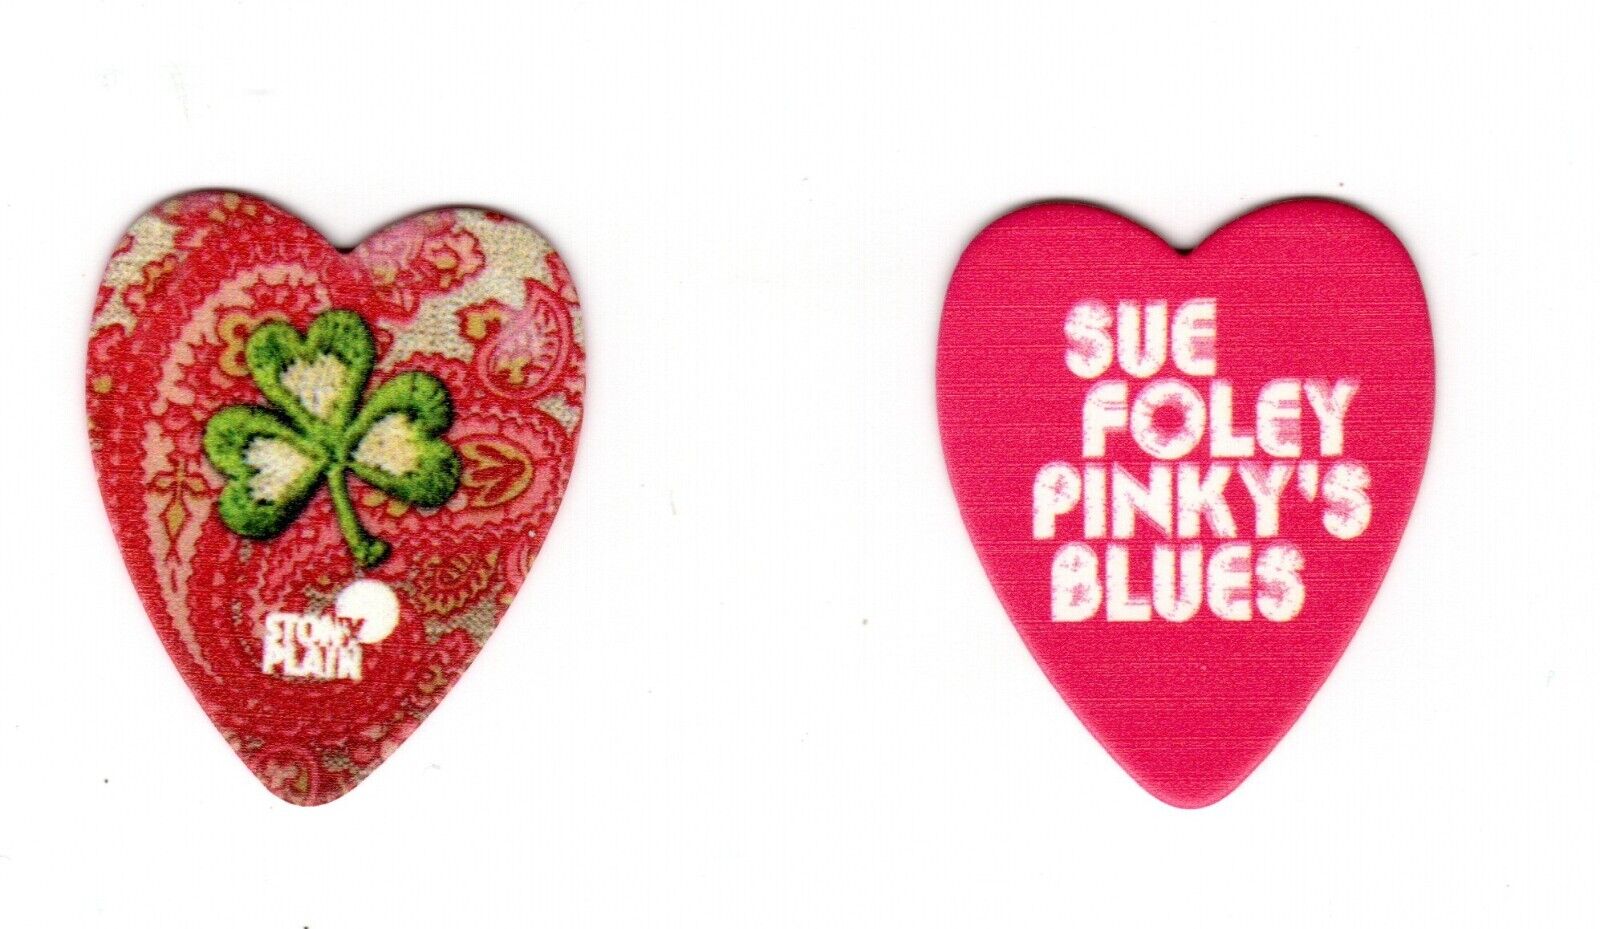 Sue Foley-pinky's Blues Guitar Pick Tour Variation 1-100% Donated To Charity